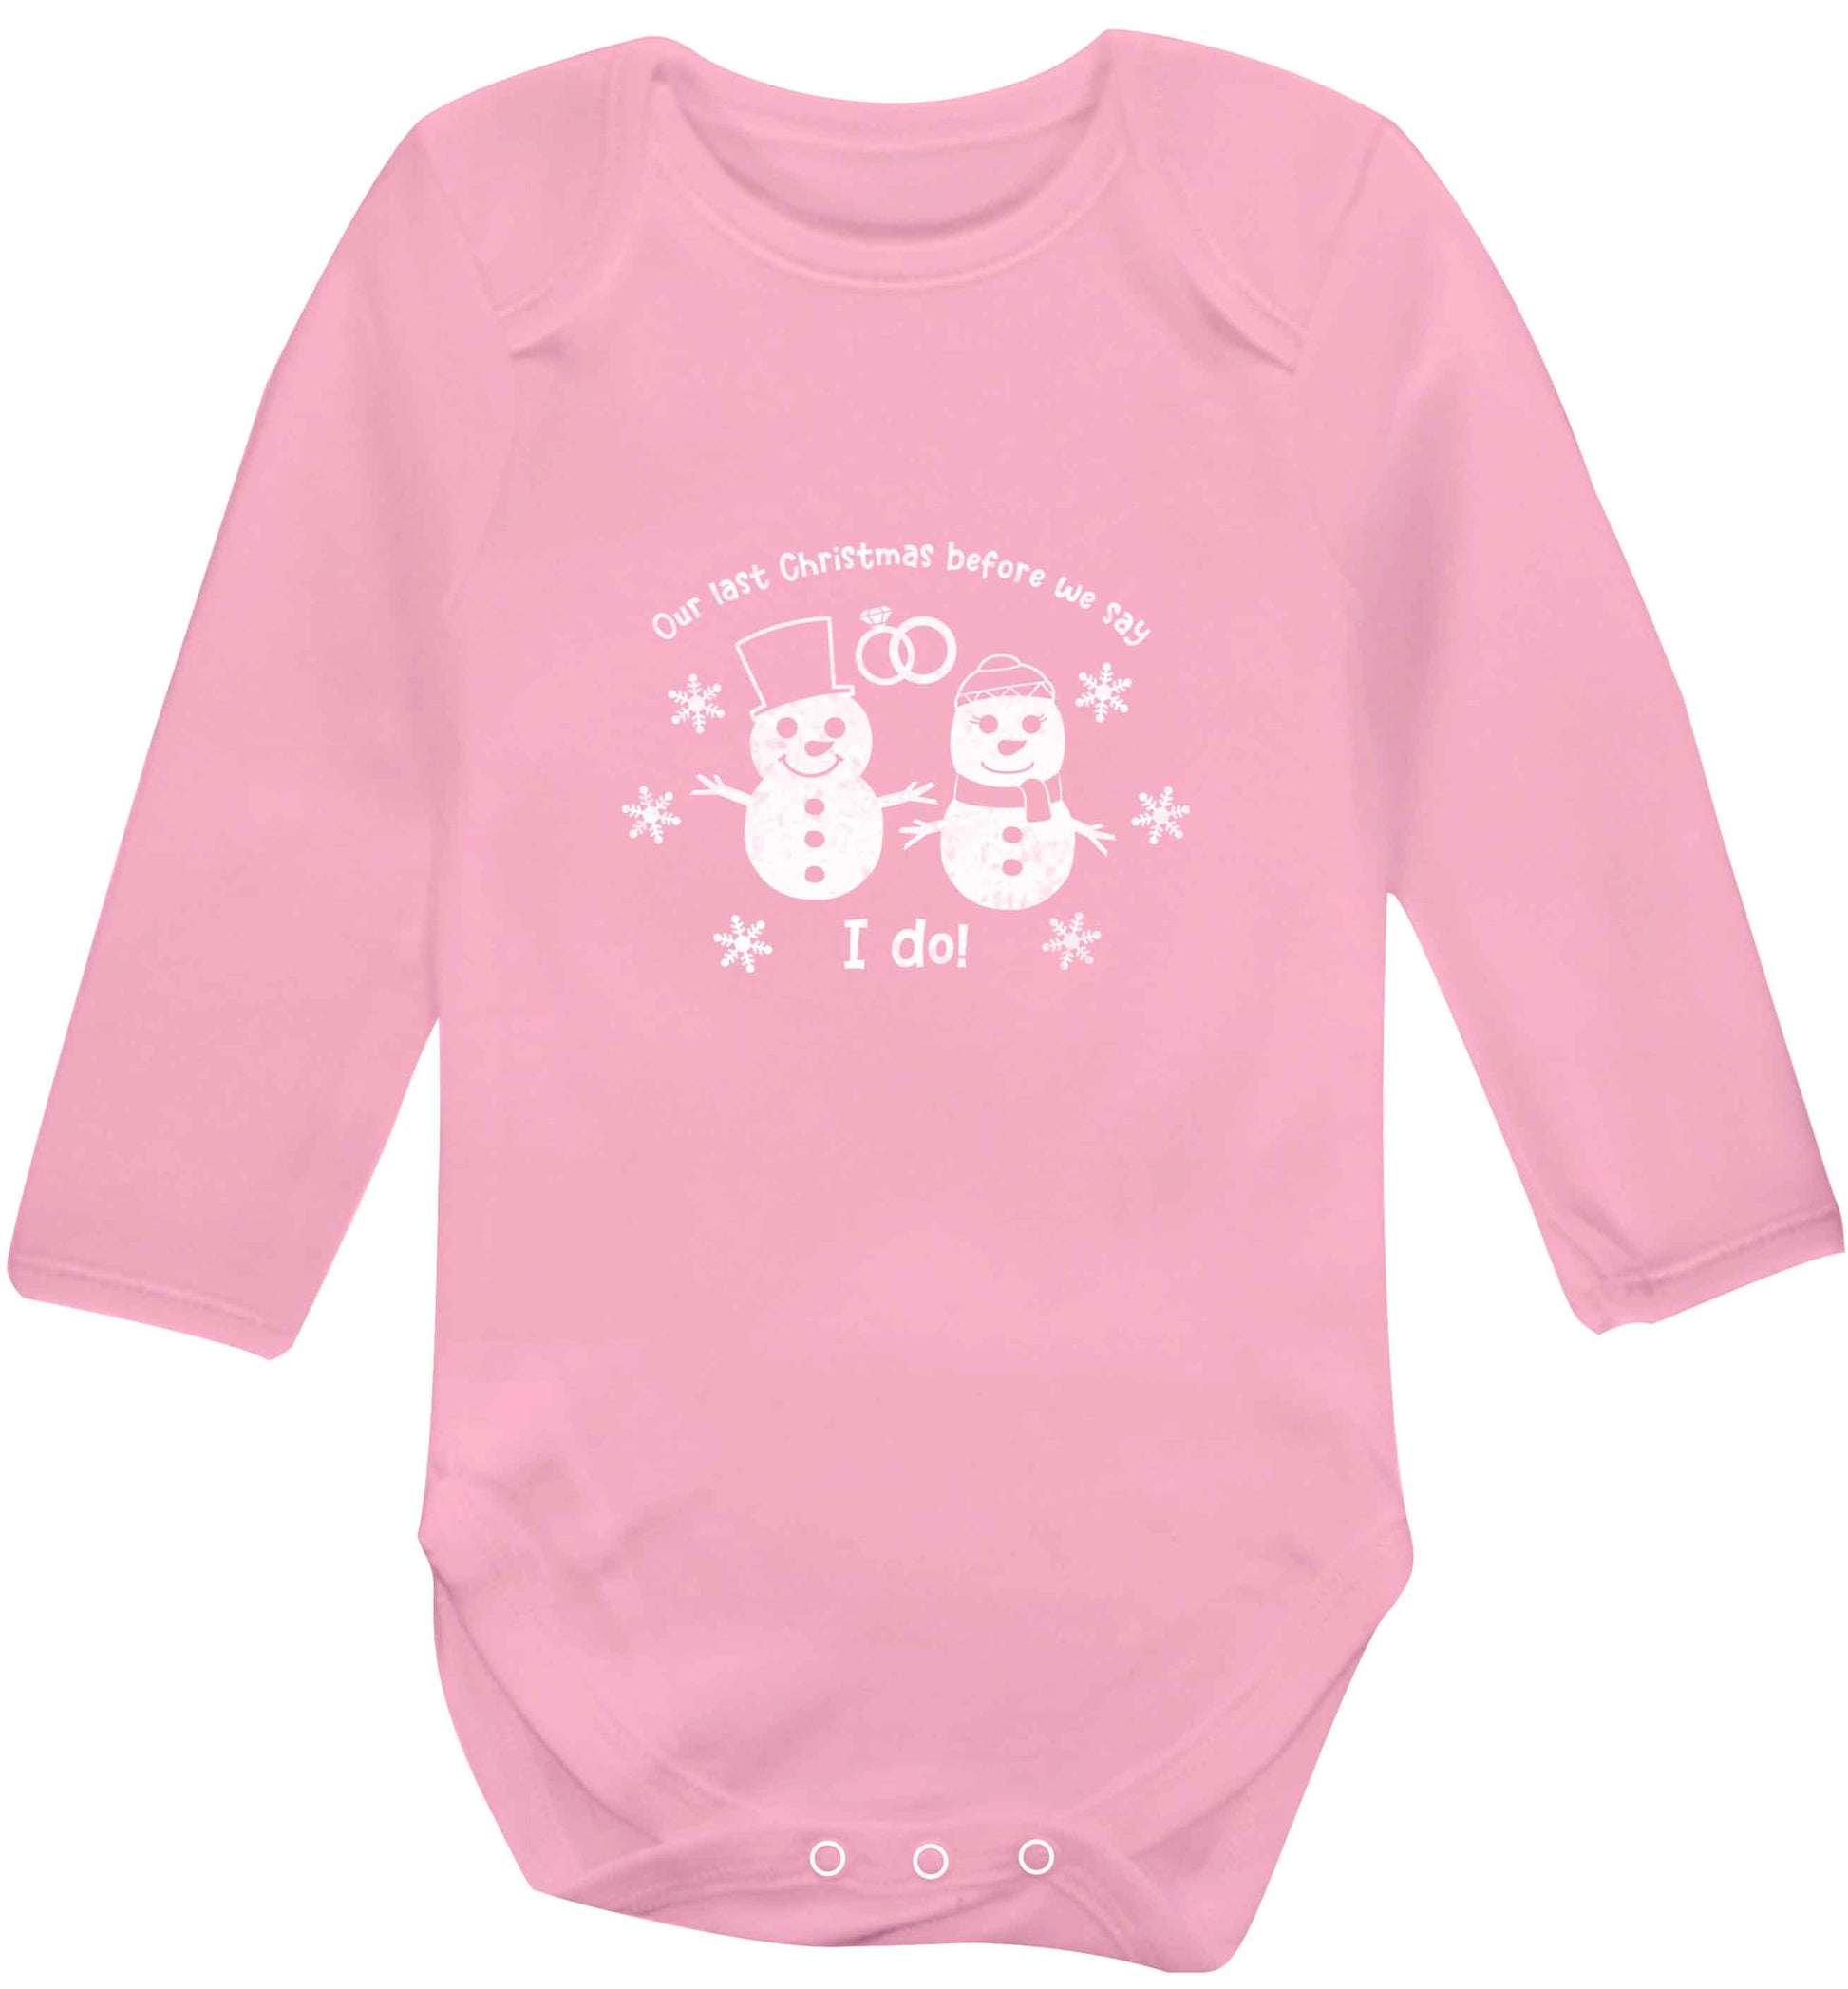 Last Christmas before we say I do baby vest long sleeved pale pink 6-12 months